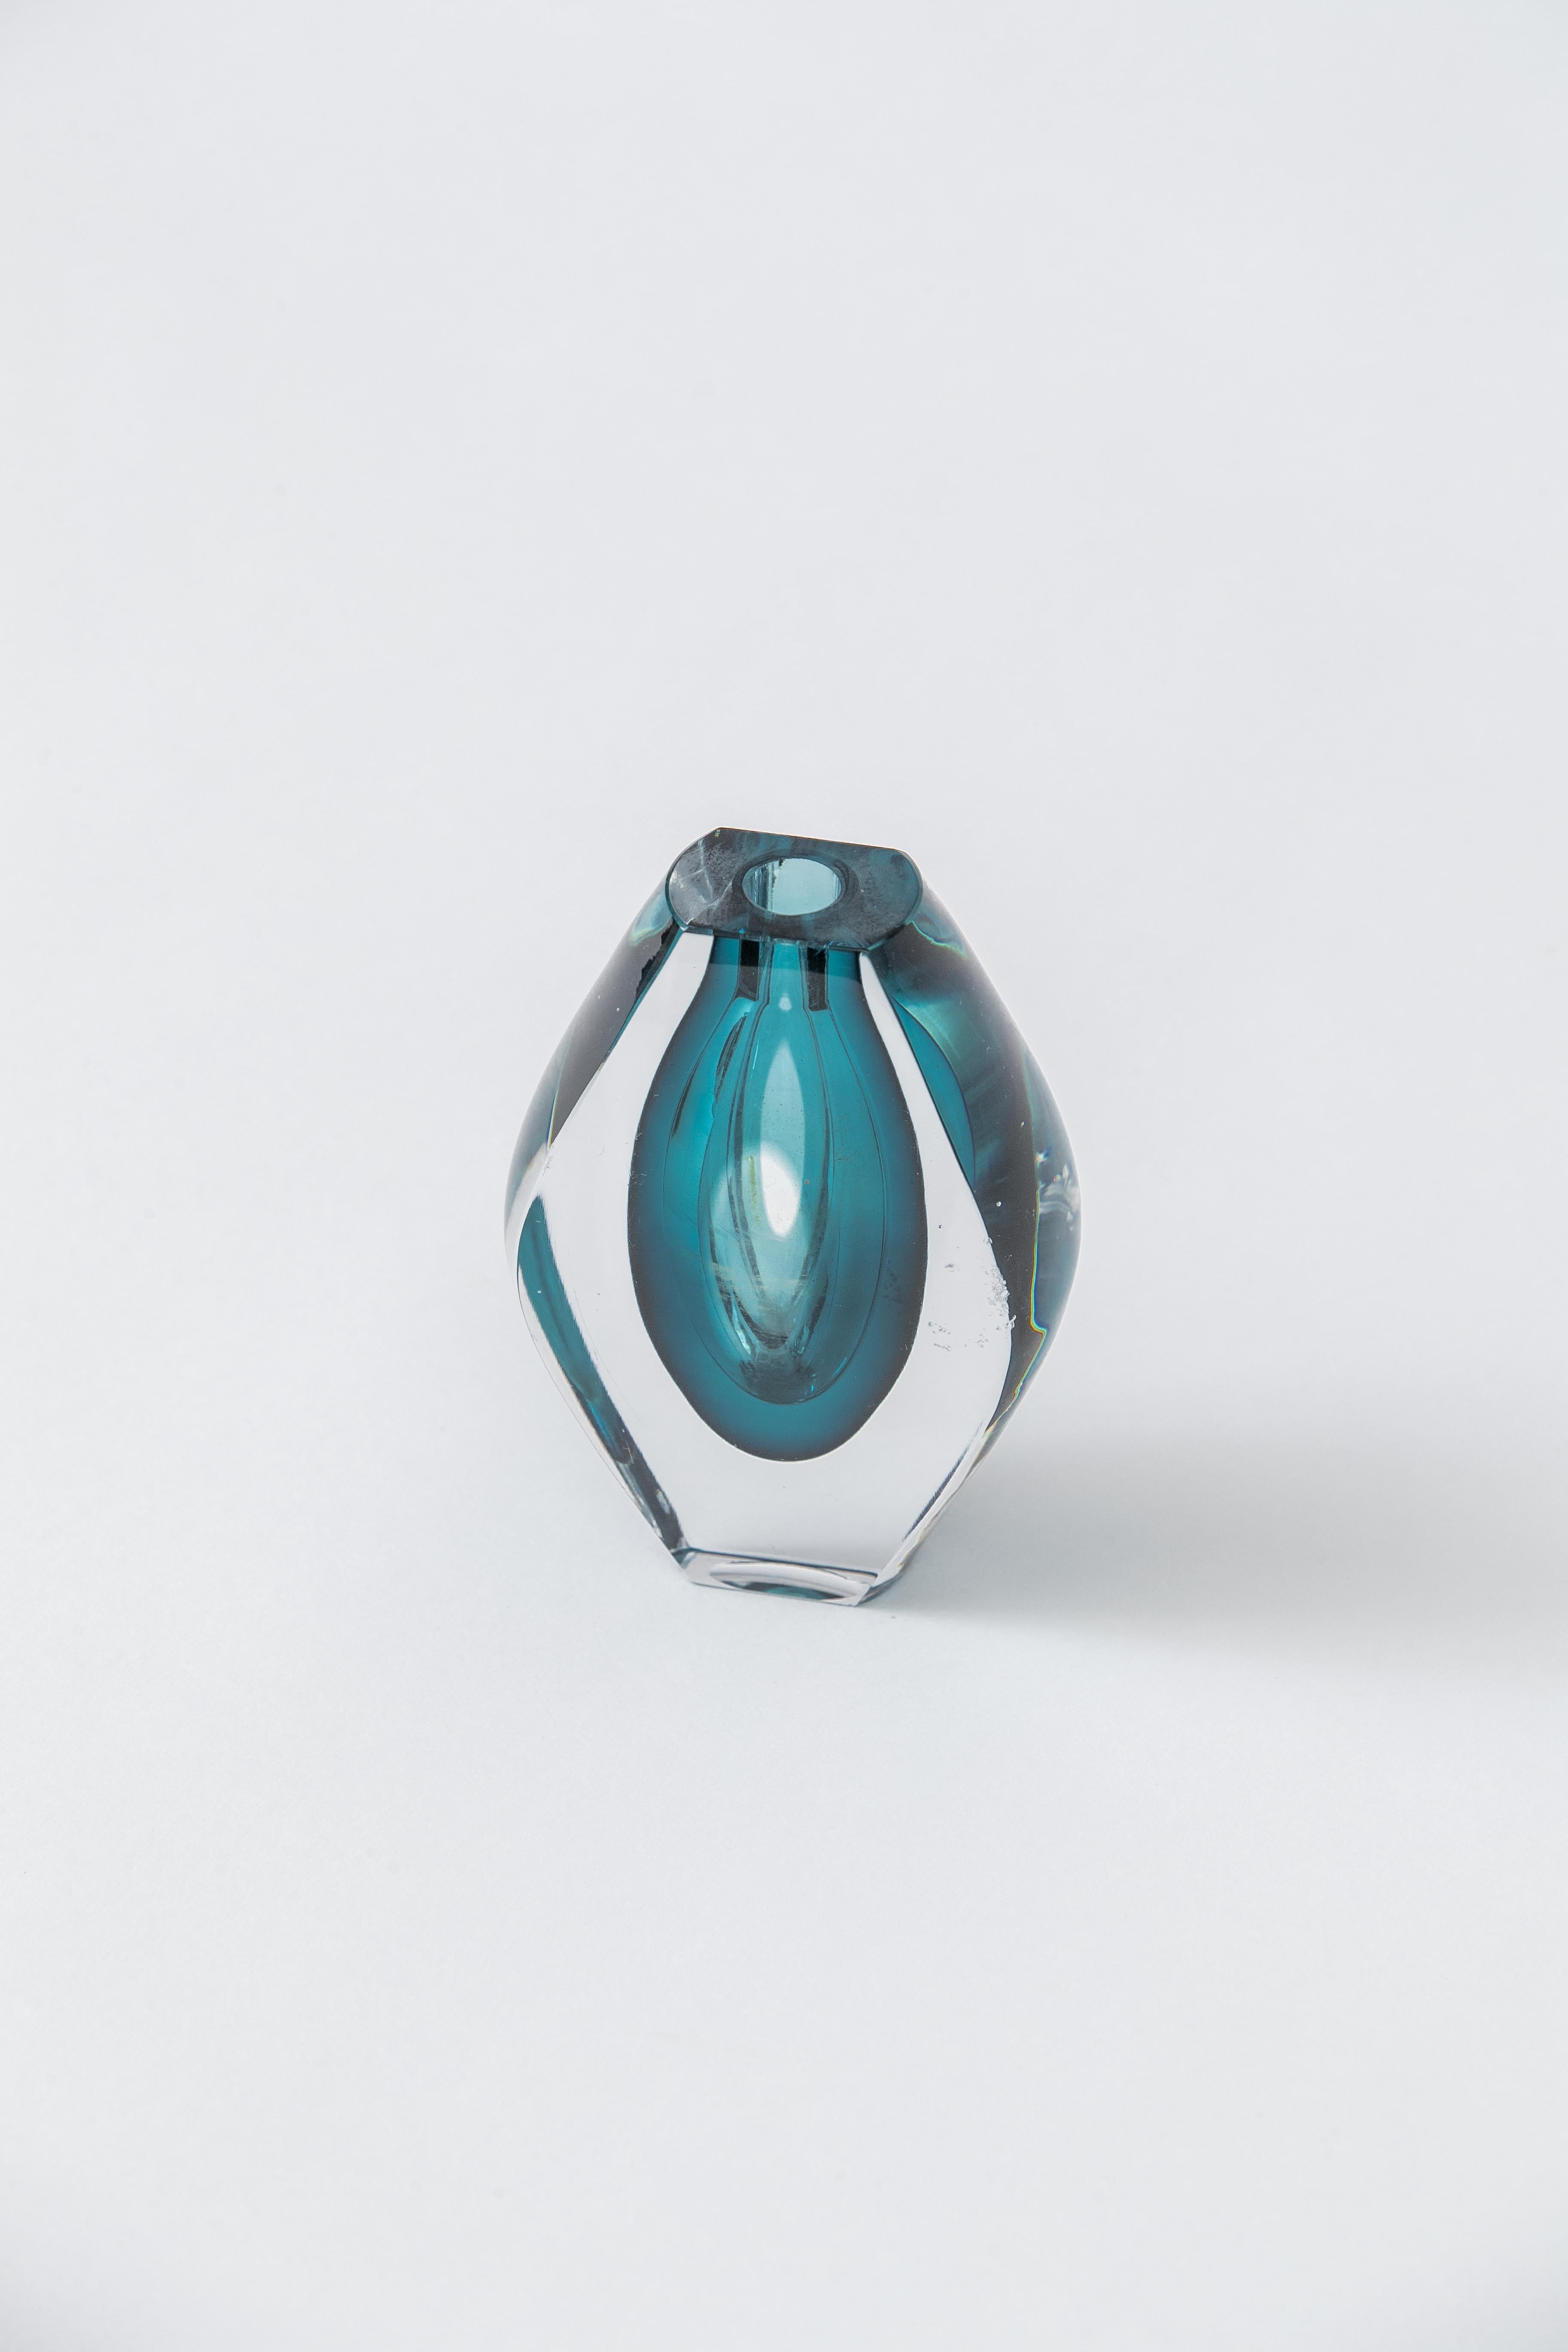 Art Glass Blue & Clear Glass Murano Soliflore, Italy, 1960's